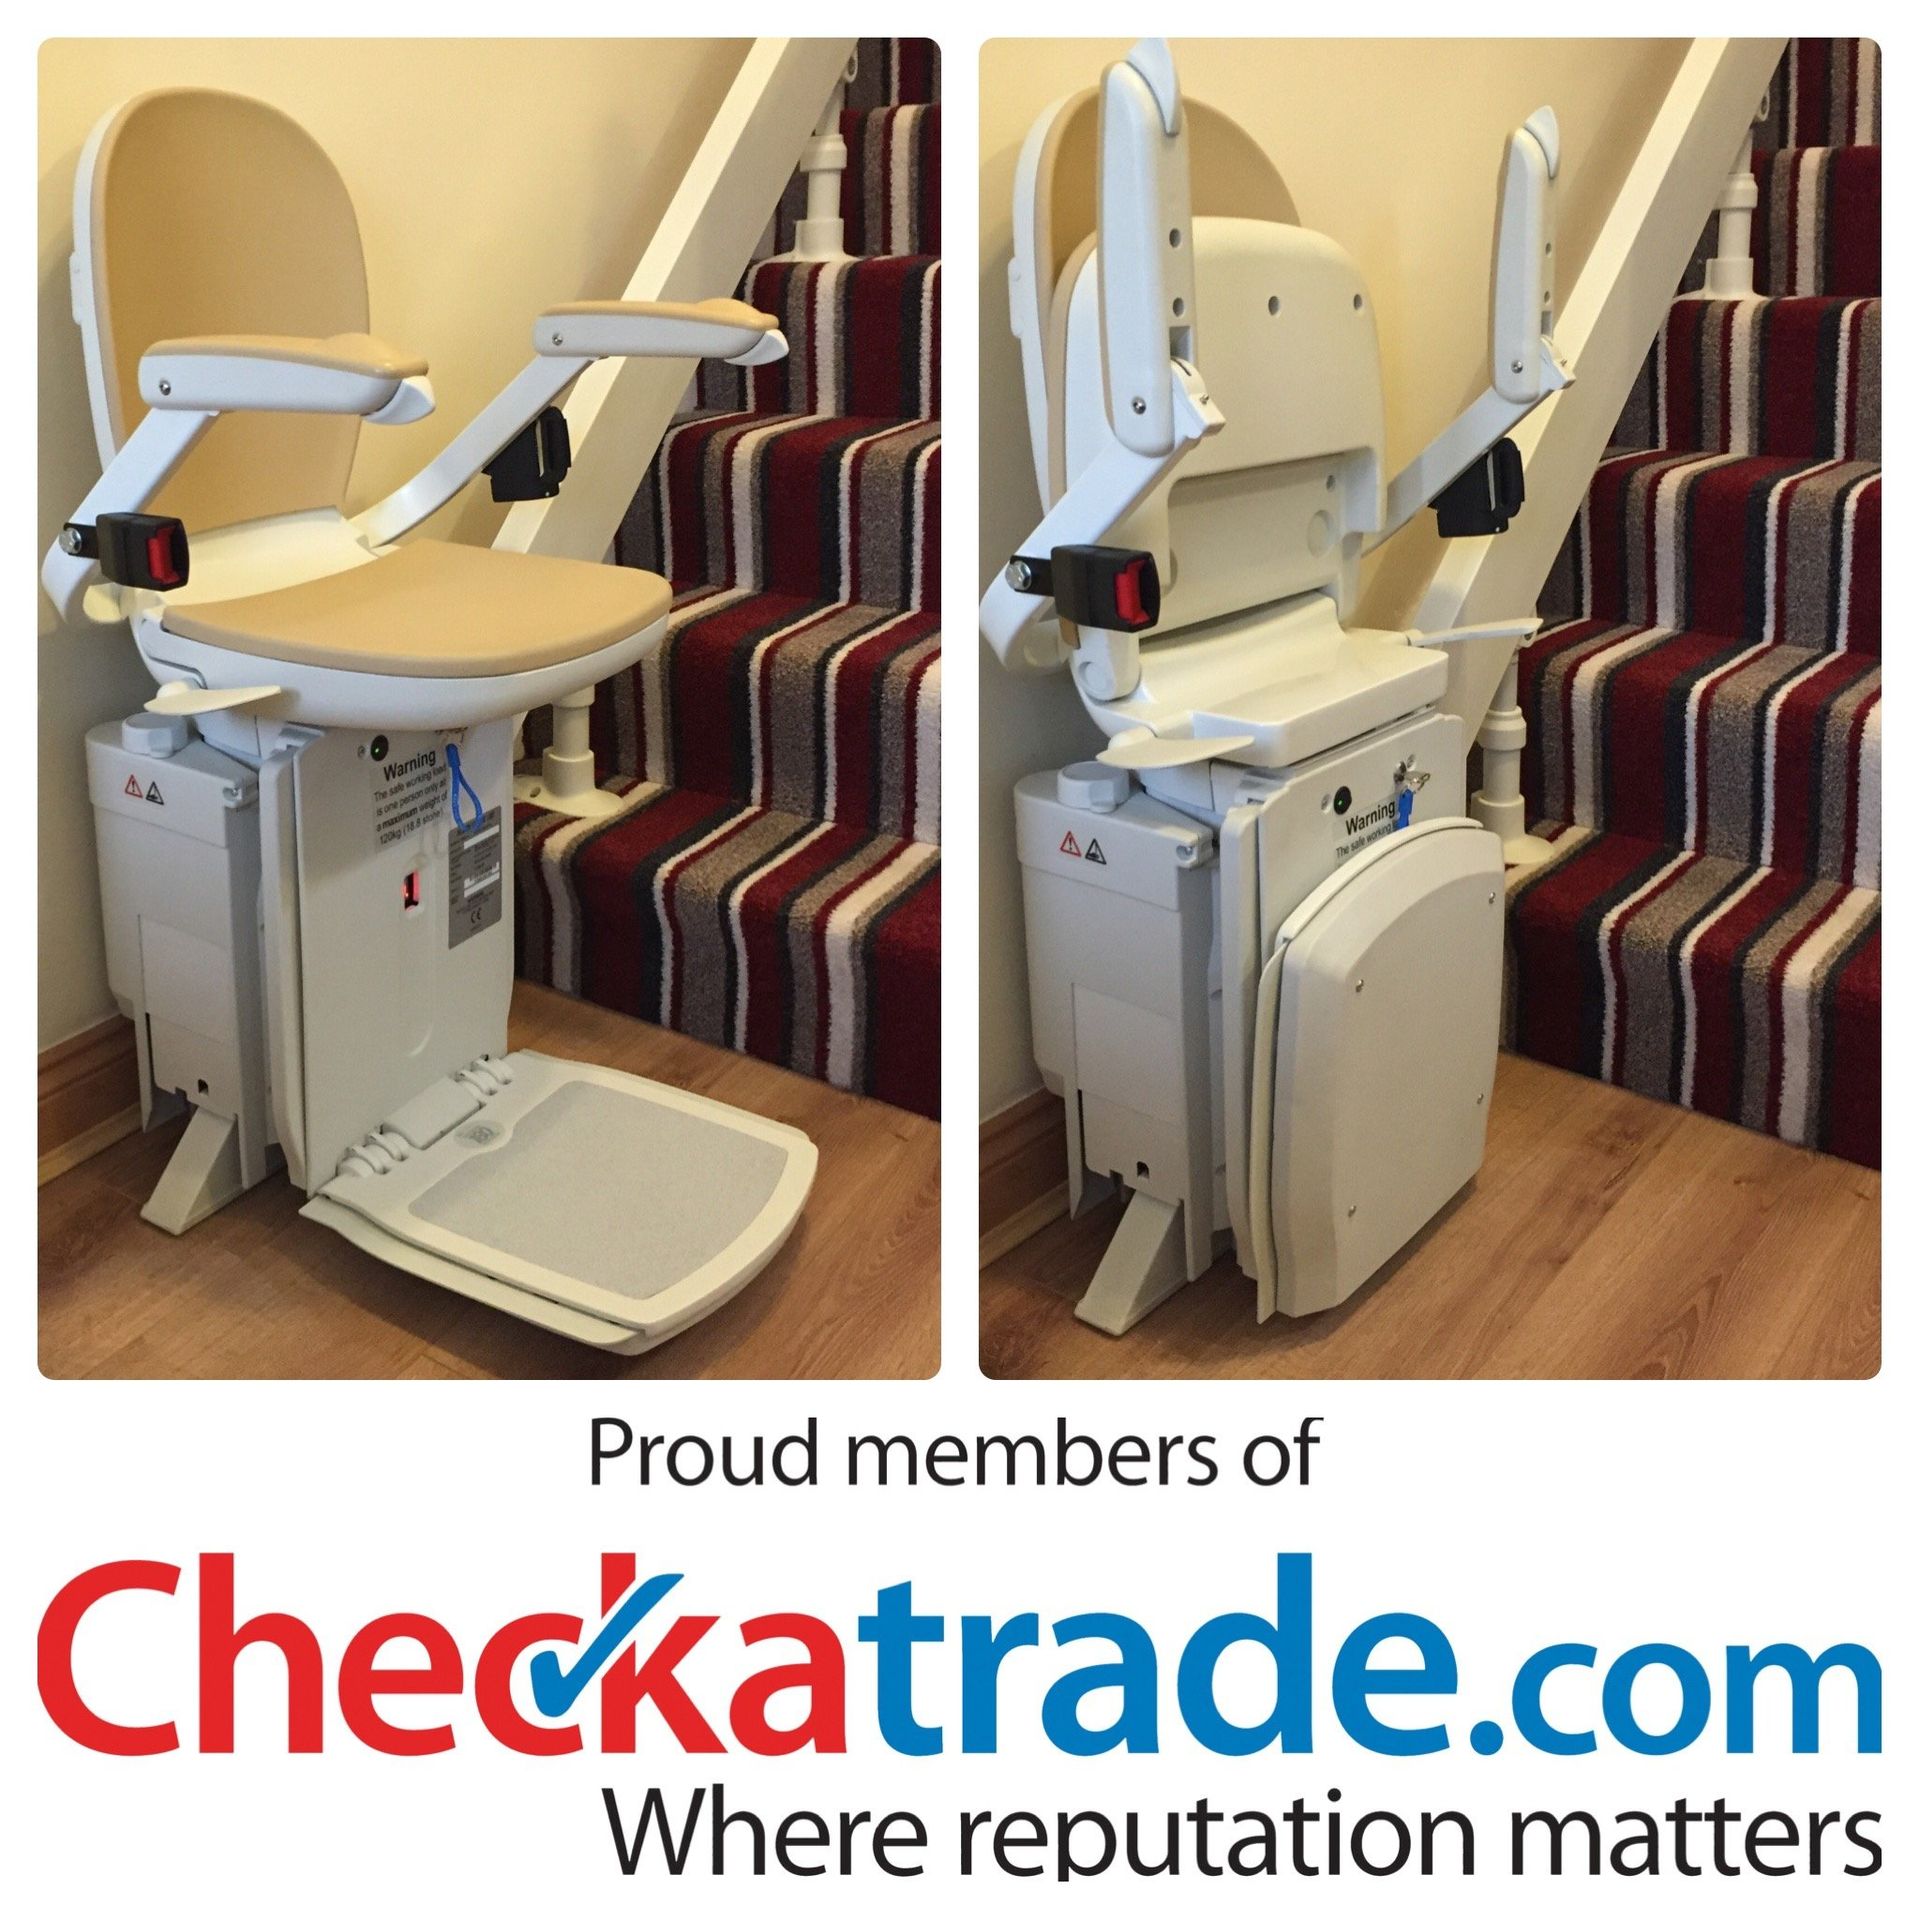 We buy back Acorn and Brooks Stairlifts, Chairlifts